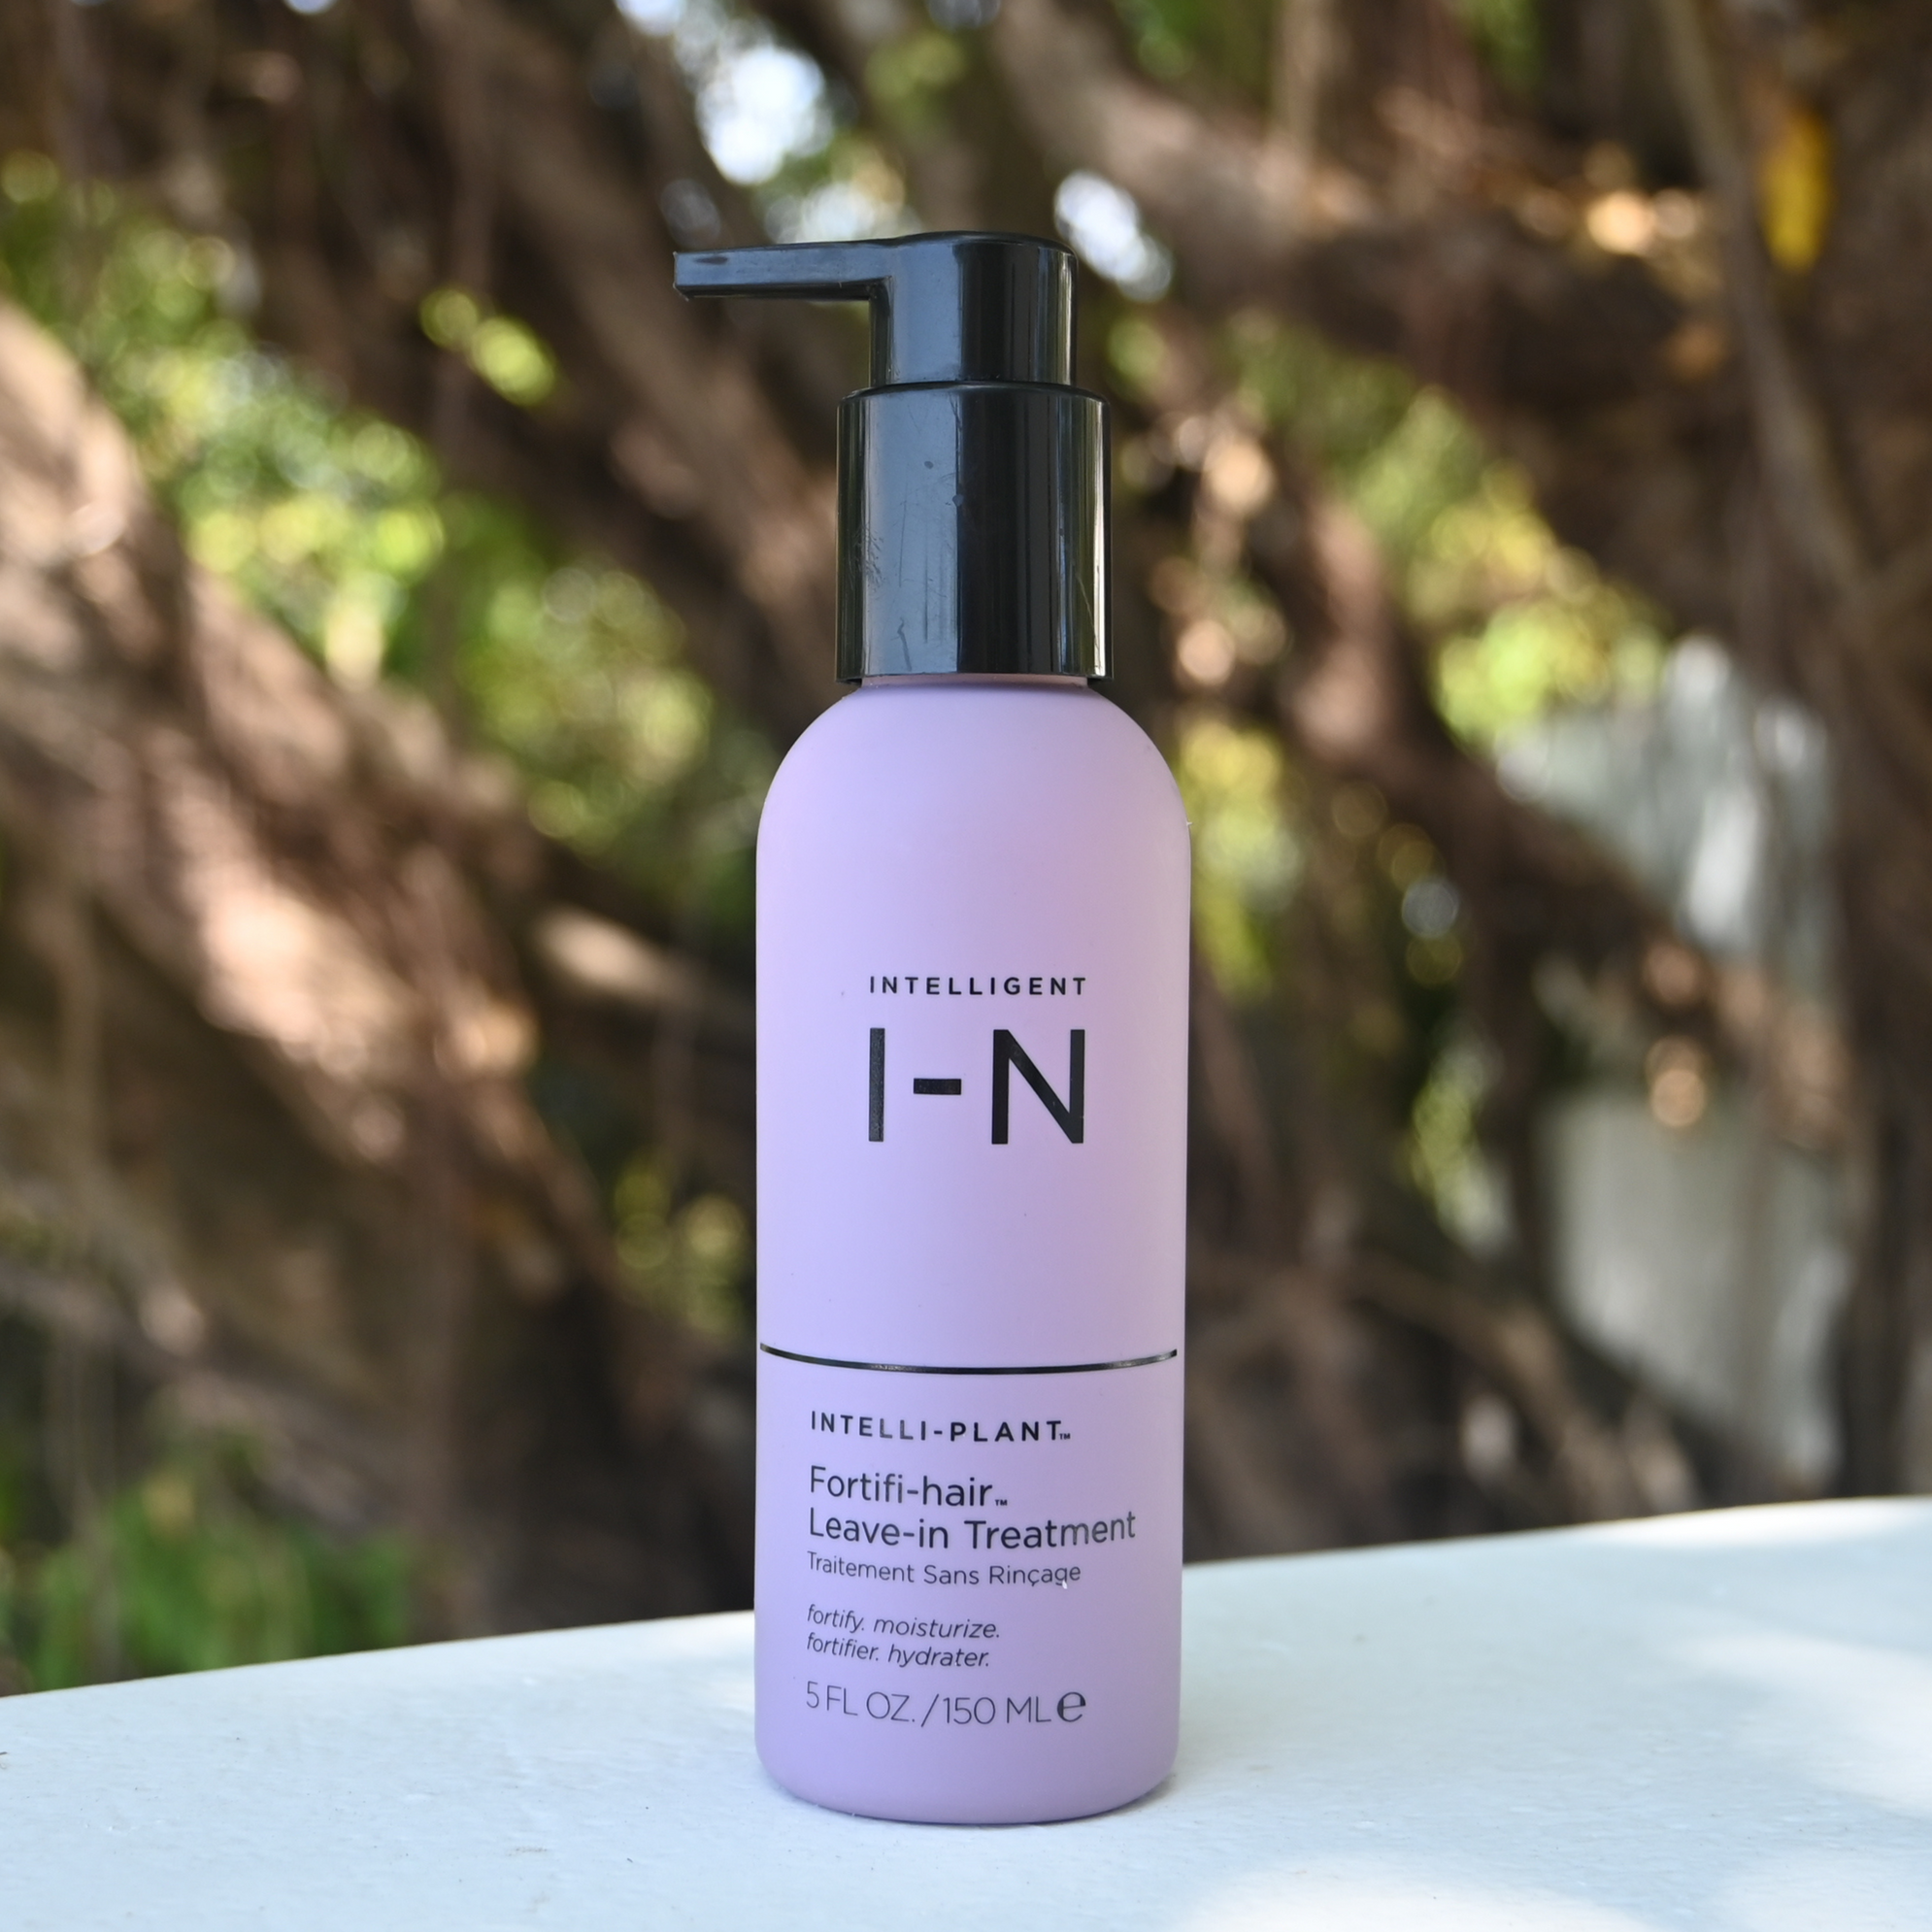 Fortifi-hair Leave-In Conditioner for Curly Hair